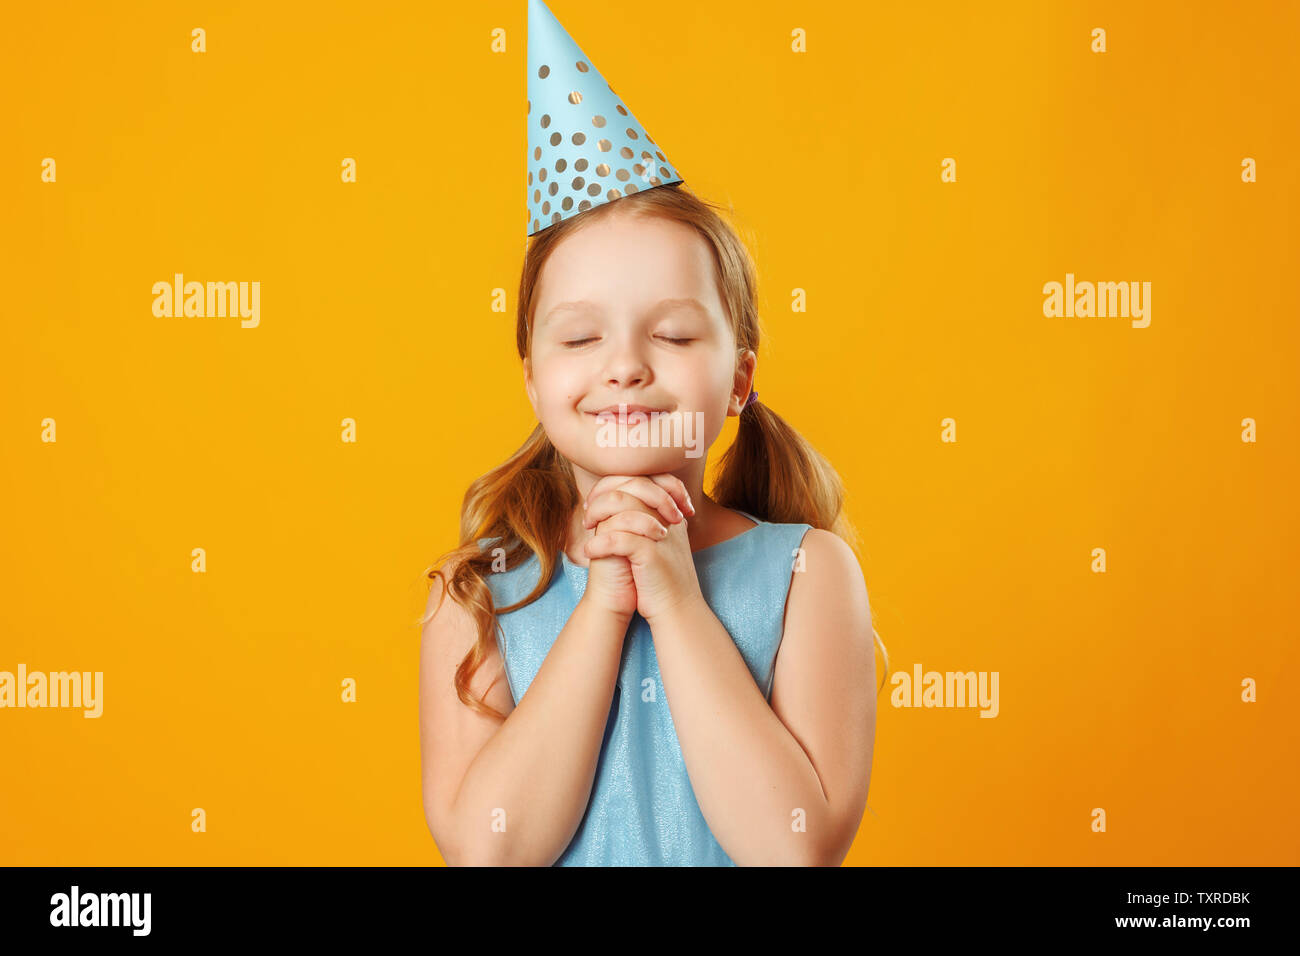 Cute little girl celebrates birthday. The child closed his eyes and made a wish. Closeup portrait on yellow background. Stock Photo